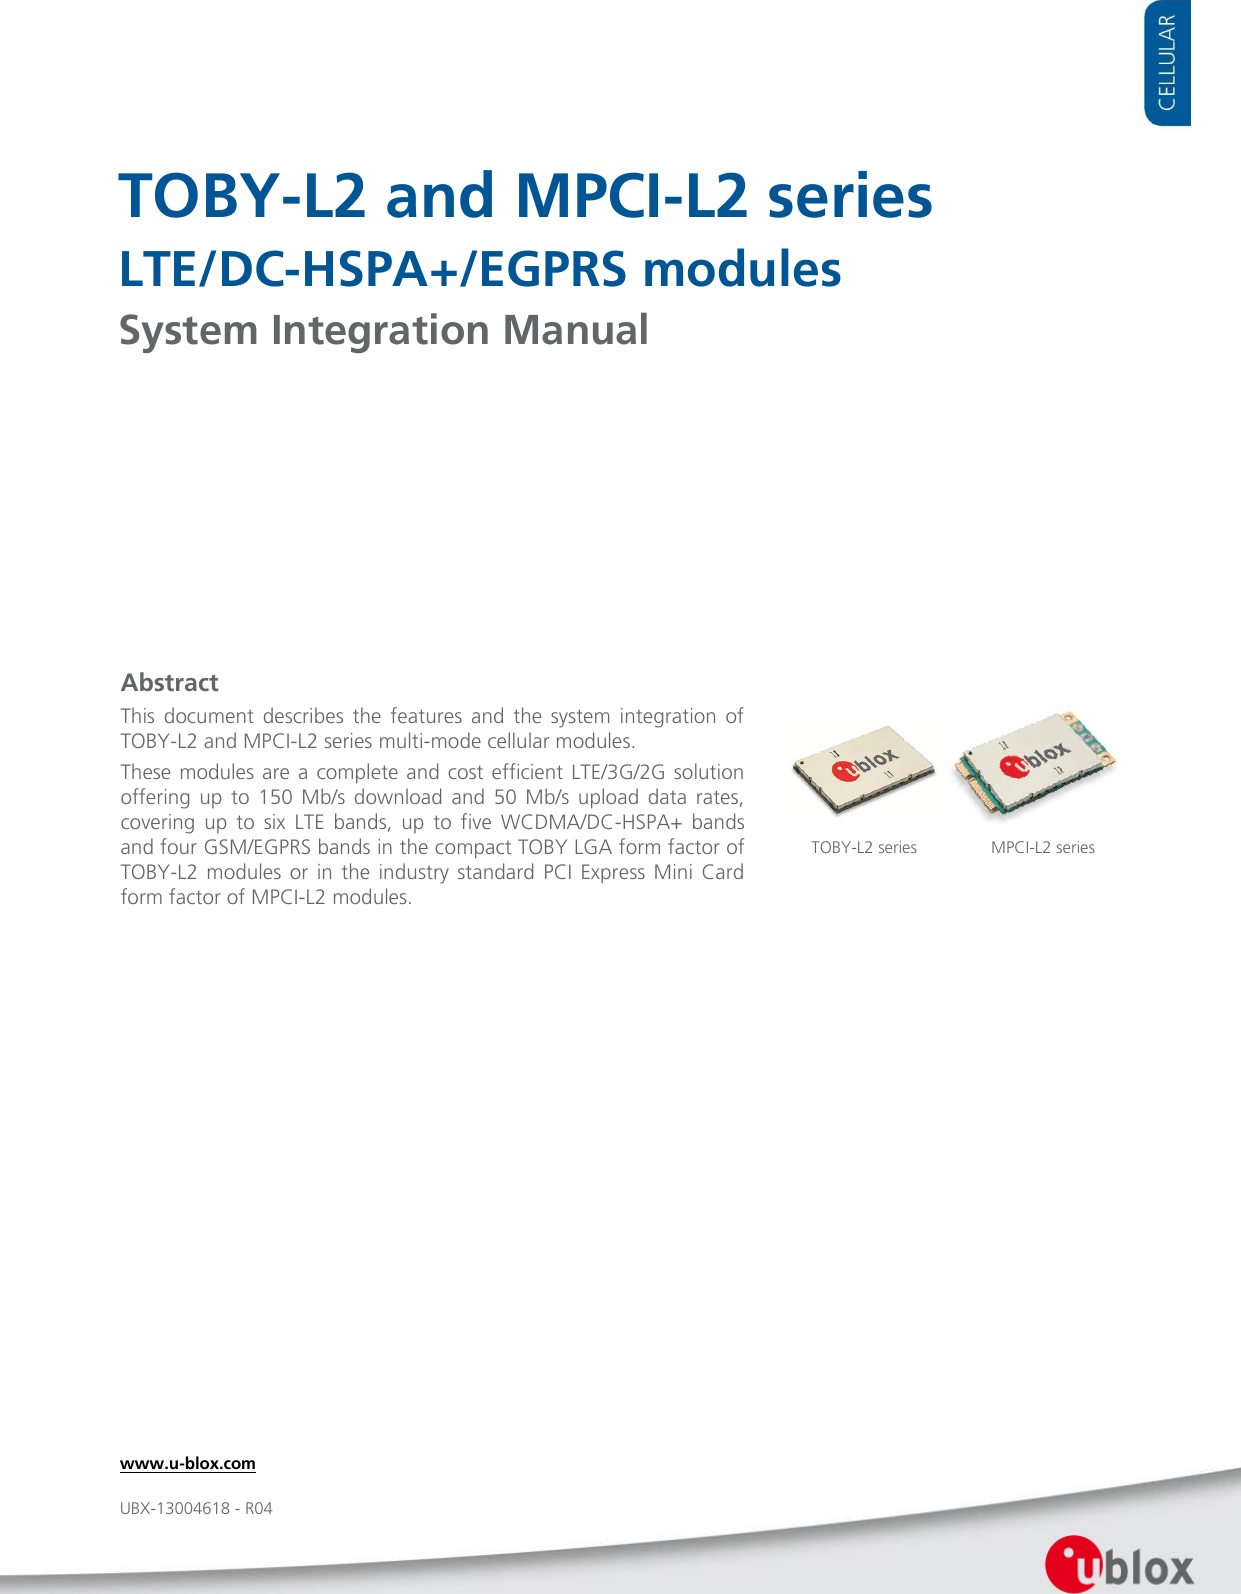     TOBY-L2 and MPCI-L2 series LTE/DC-HSPA+/EGPRS modules System Integration Manual               Abstract This  document  describes  the  features  and  the  system  integration  of TOBY-L2 and MPCI-L2 series multi-mode cellular modules. These modules are a complete and cost  efficient  LTE/3G/2G  solution offering  up  to  150  Mb/s  download  and  50  Mb/s  upload  data  rates, covering  up  to  six  LTE  bands,  up  to  five  WCDMA/DC-HSPA+  bands and four GSM/EGPRS bands in the compact TOBY LGA form factor of TOBY-L2  modules  or  in  the  industry standard  PCI  Express Mini  Card form factor of MPCI-L2 modules. TOBY-L2 series  www.u-blox.com UBX-13004618 - R04 MPCI-L2 series  